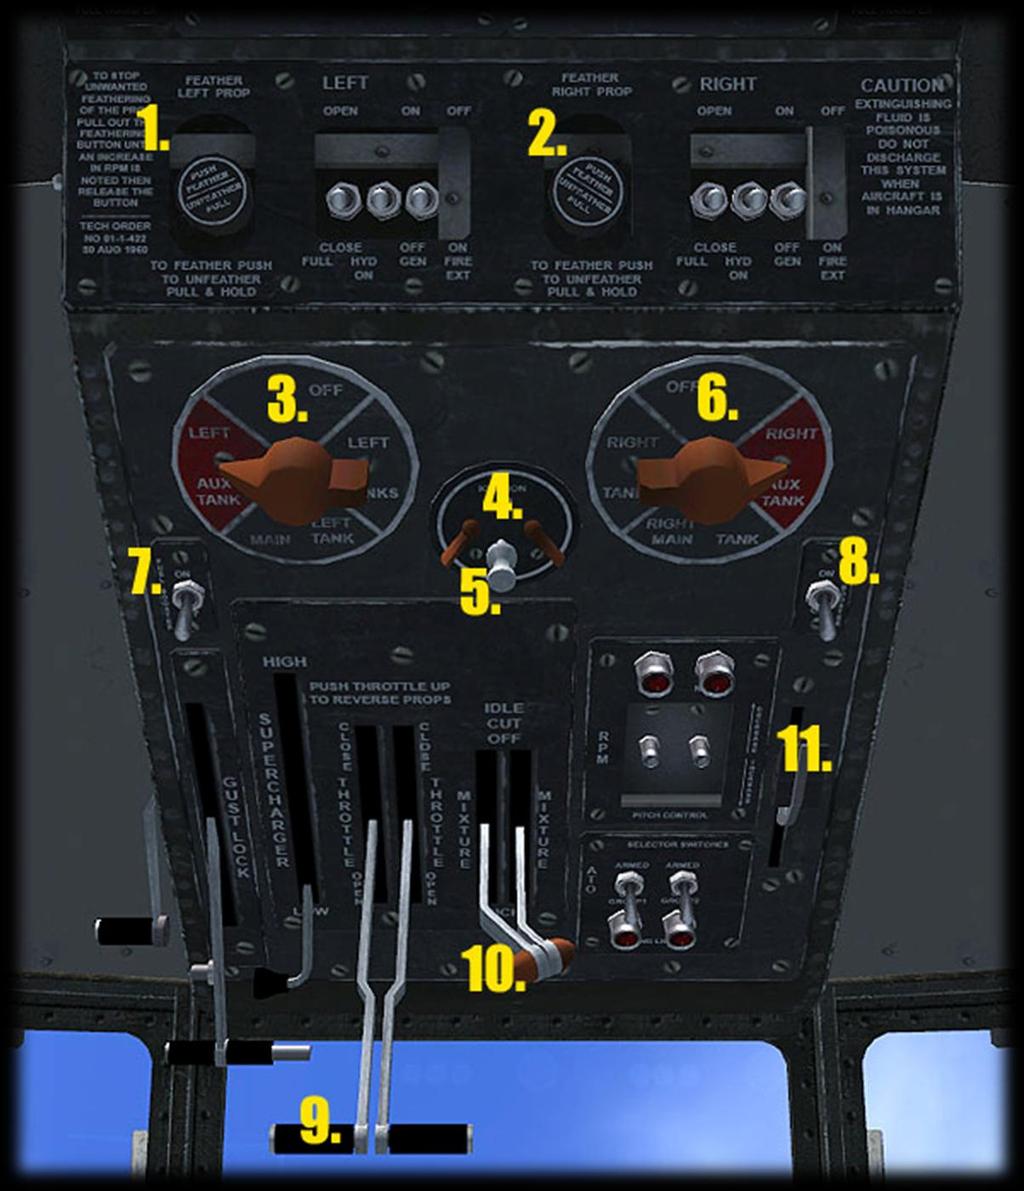 Overhead Console - Aft 1) Propeller 1 Feathering Switch. Left-click to set minimum pitch, rightclick to reset to maximum pitch.